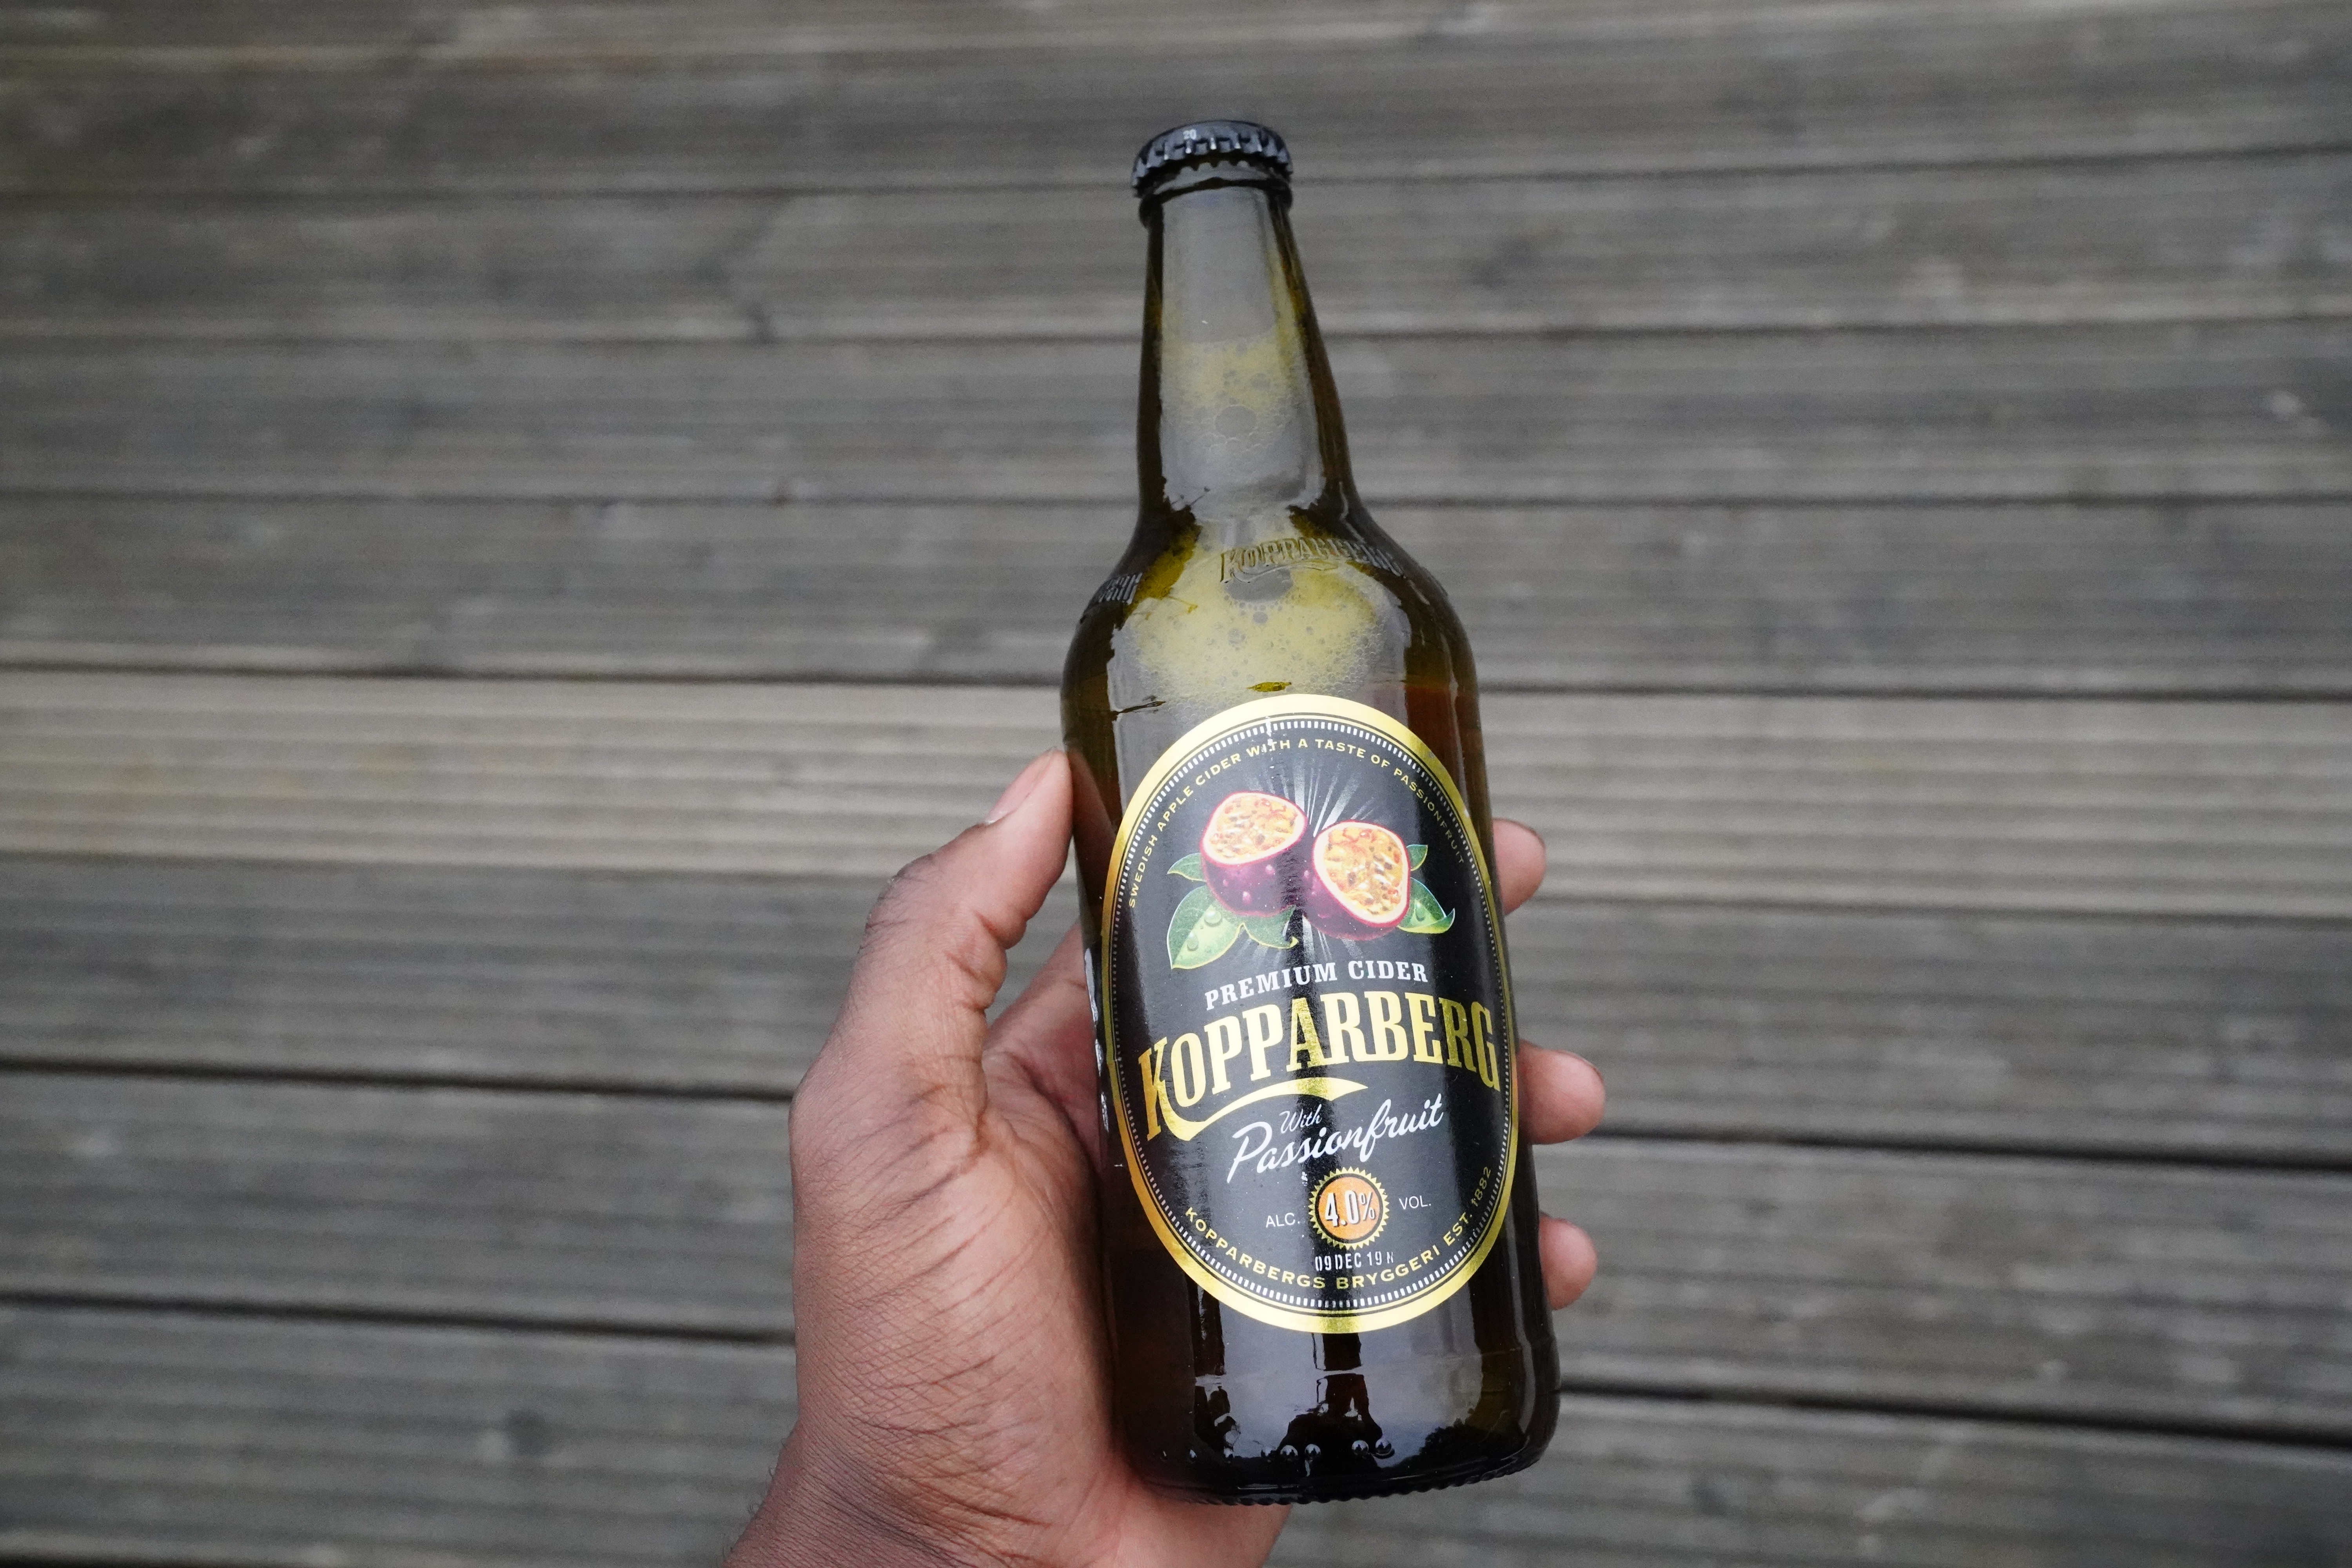 Kopparberg Drops another flavour with Passion